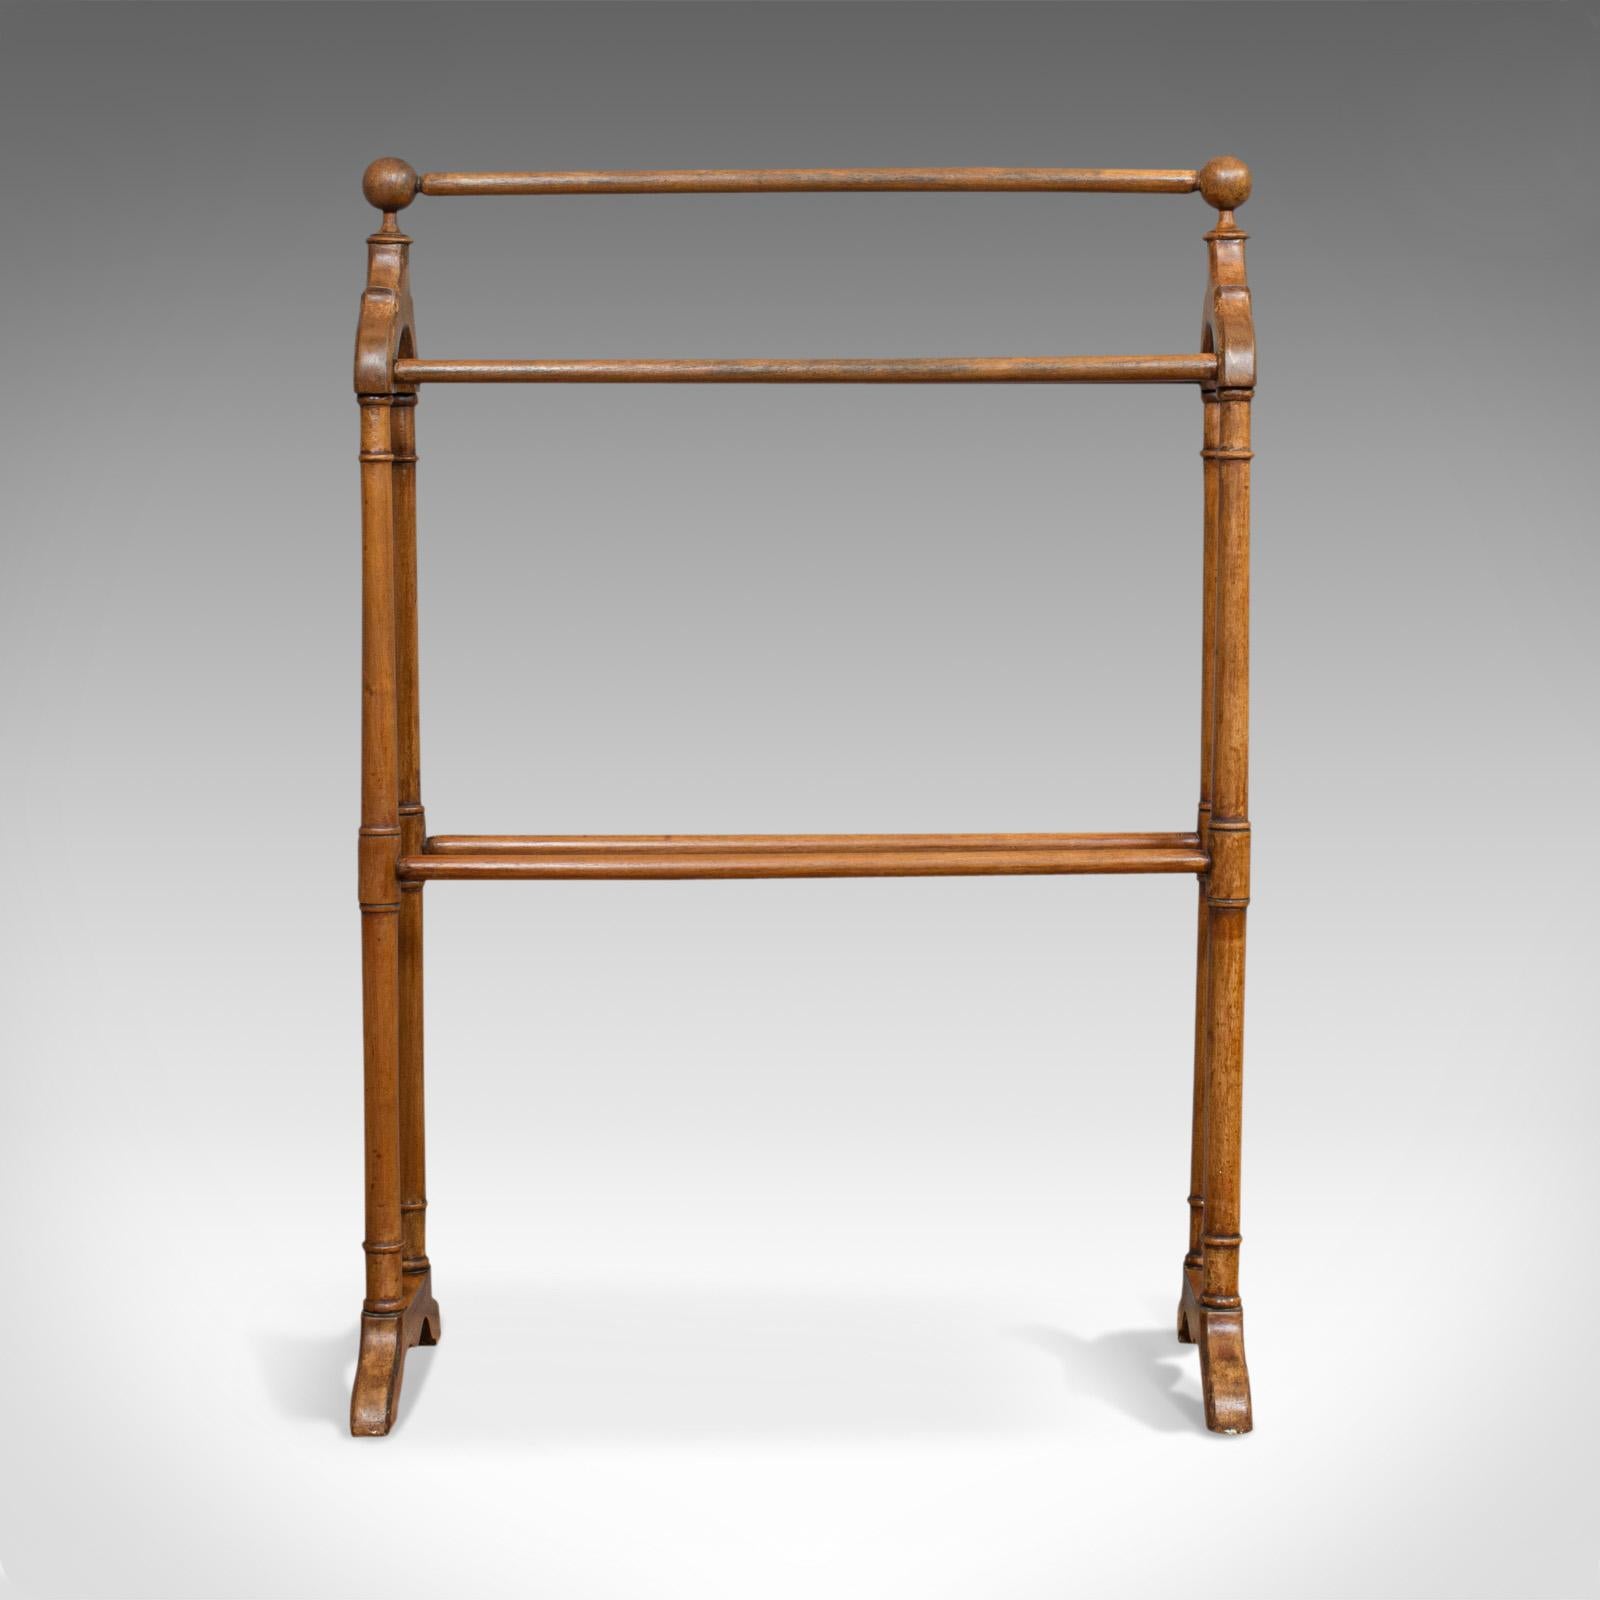 This is a large antique towel rack. An English, mahogany clothes horse or dryer, dating to the Victorian period, circa 1880.

Elegant Victorian framework
Displays a desirable aged patina
Light coloured mahogany shows fine grain interest
Gently